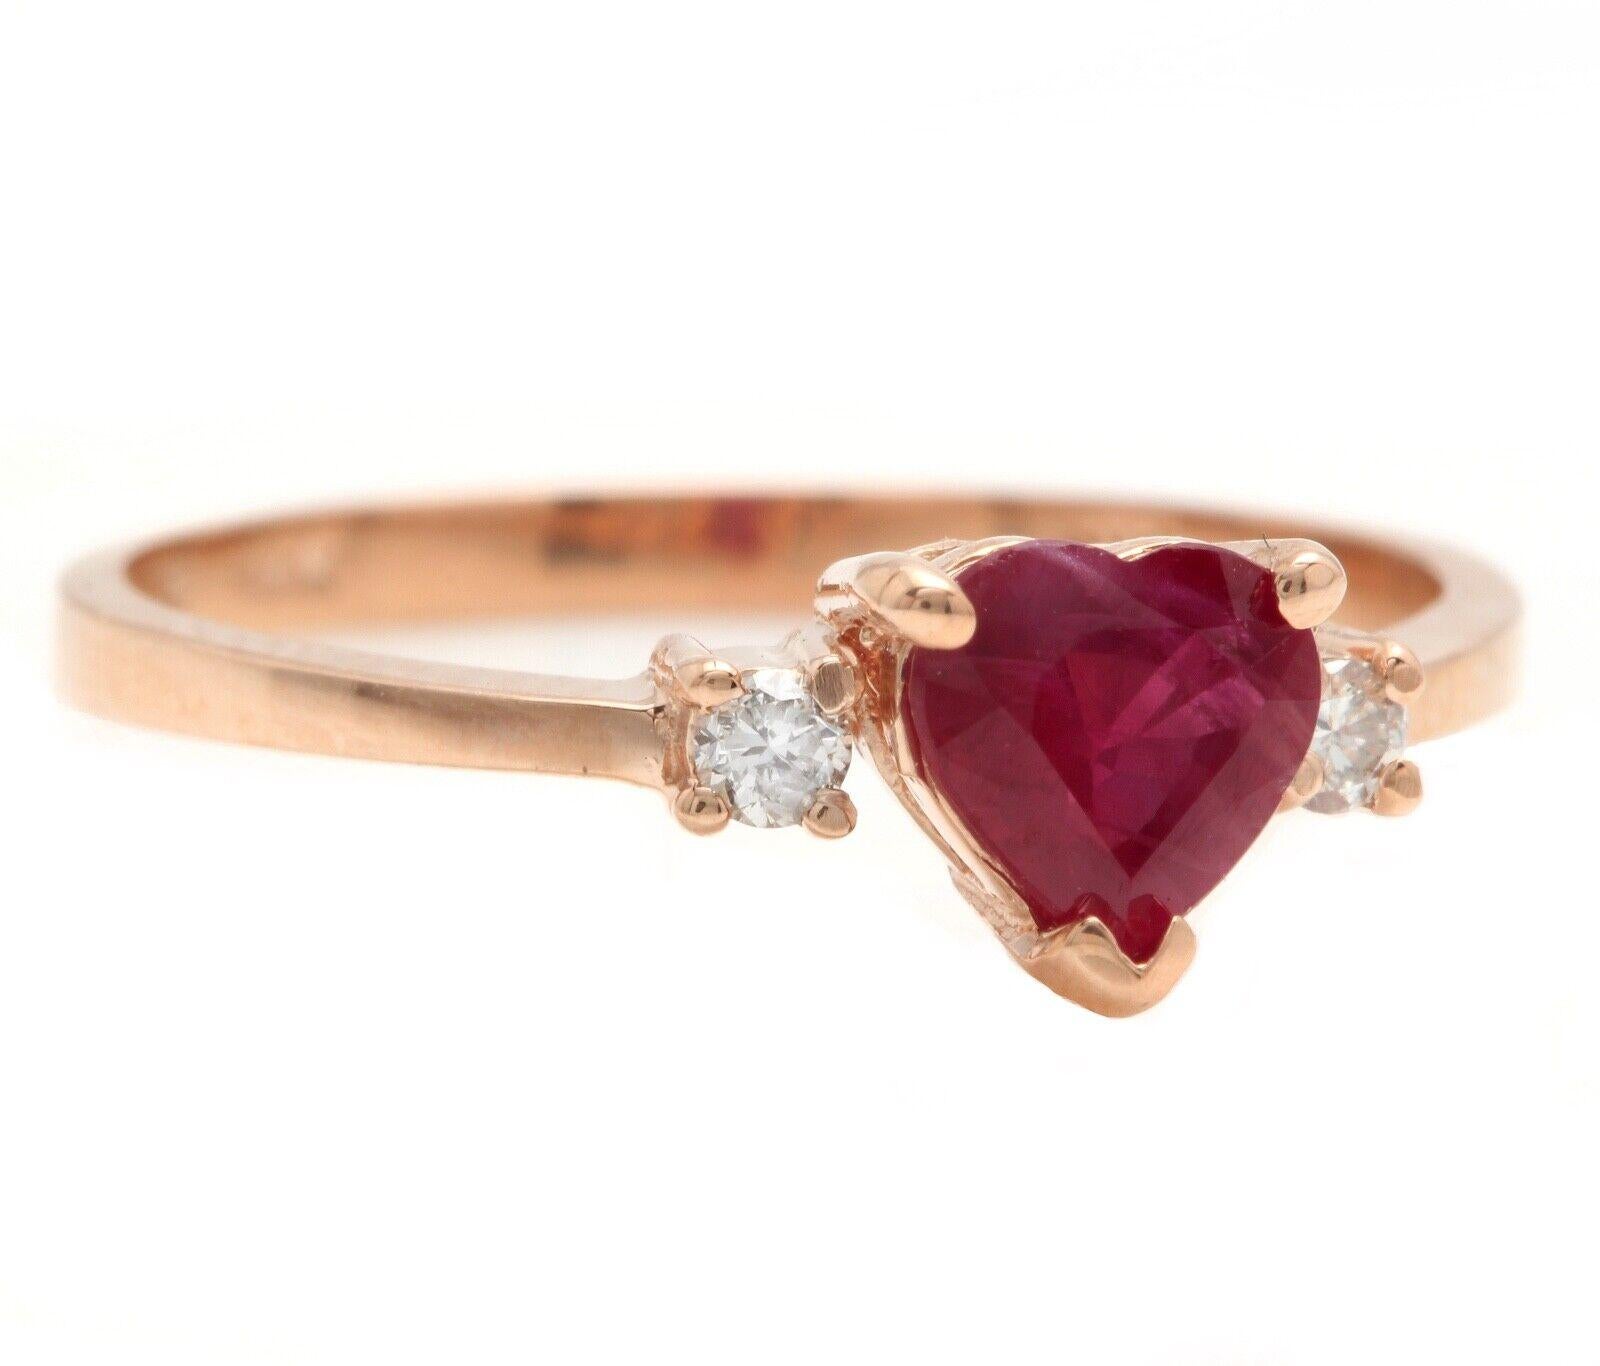 Impressive Natural Red Ruby and Diamond 14K Solid Rose Gold Heart Ring

Suggested Replacement Value $2,500.00

Total Natural Red Ruby Weight is: Approx. 0.70 Carats 
 
Natural Round Diamonds Weight: Approx. 0.08 Carats (color G-H / Clarity SI)

Ring